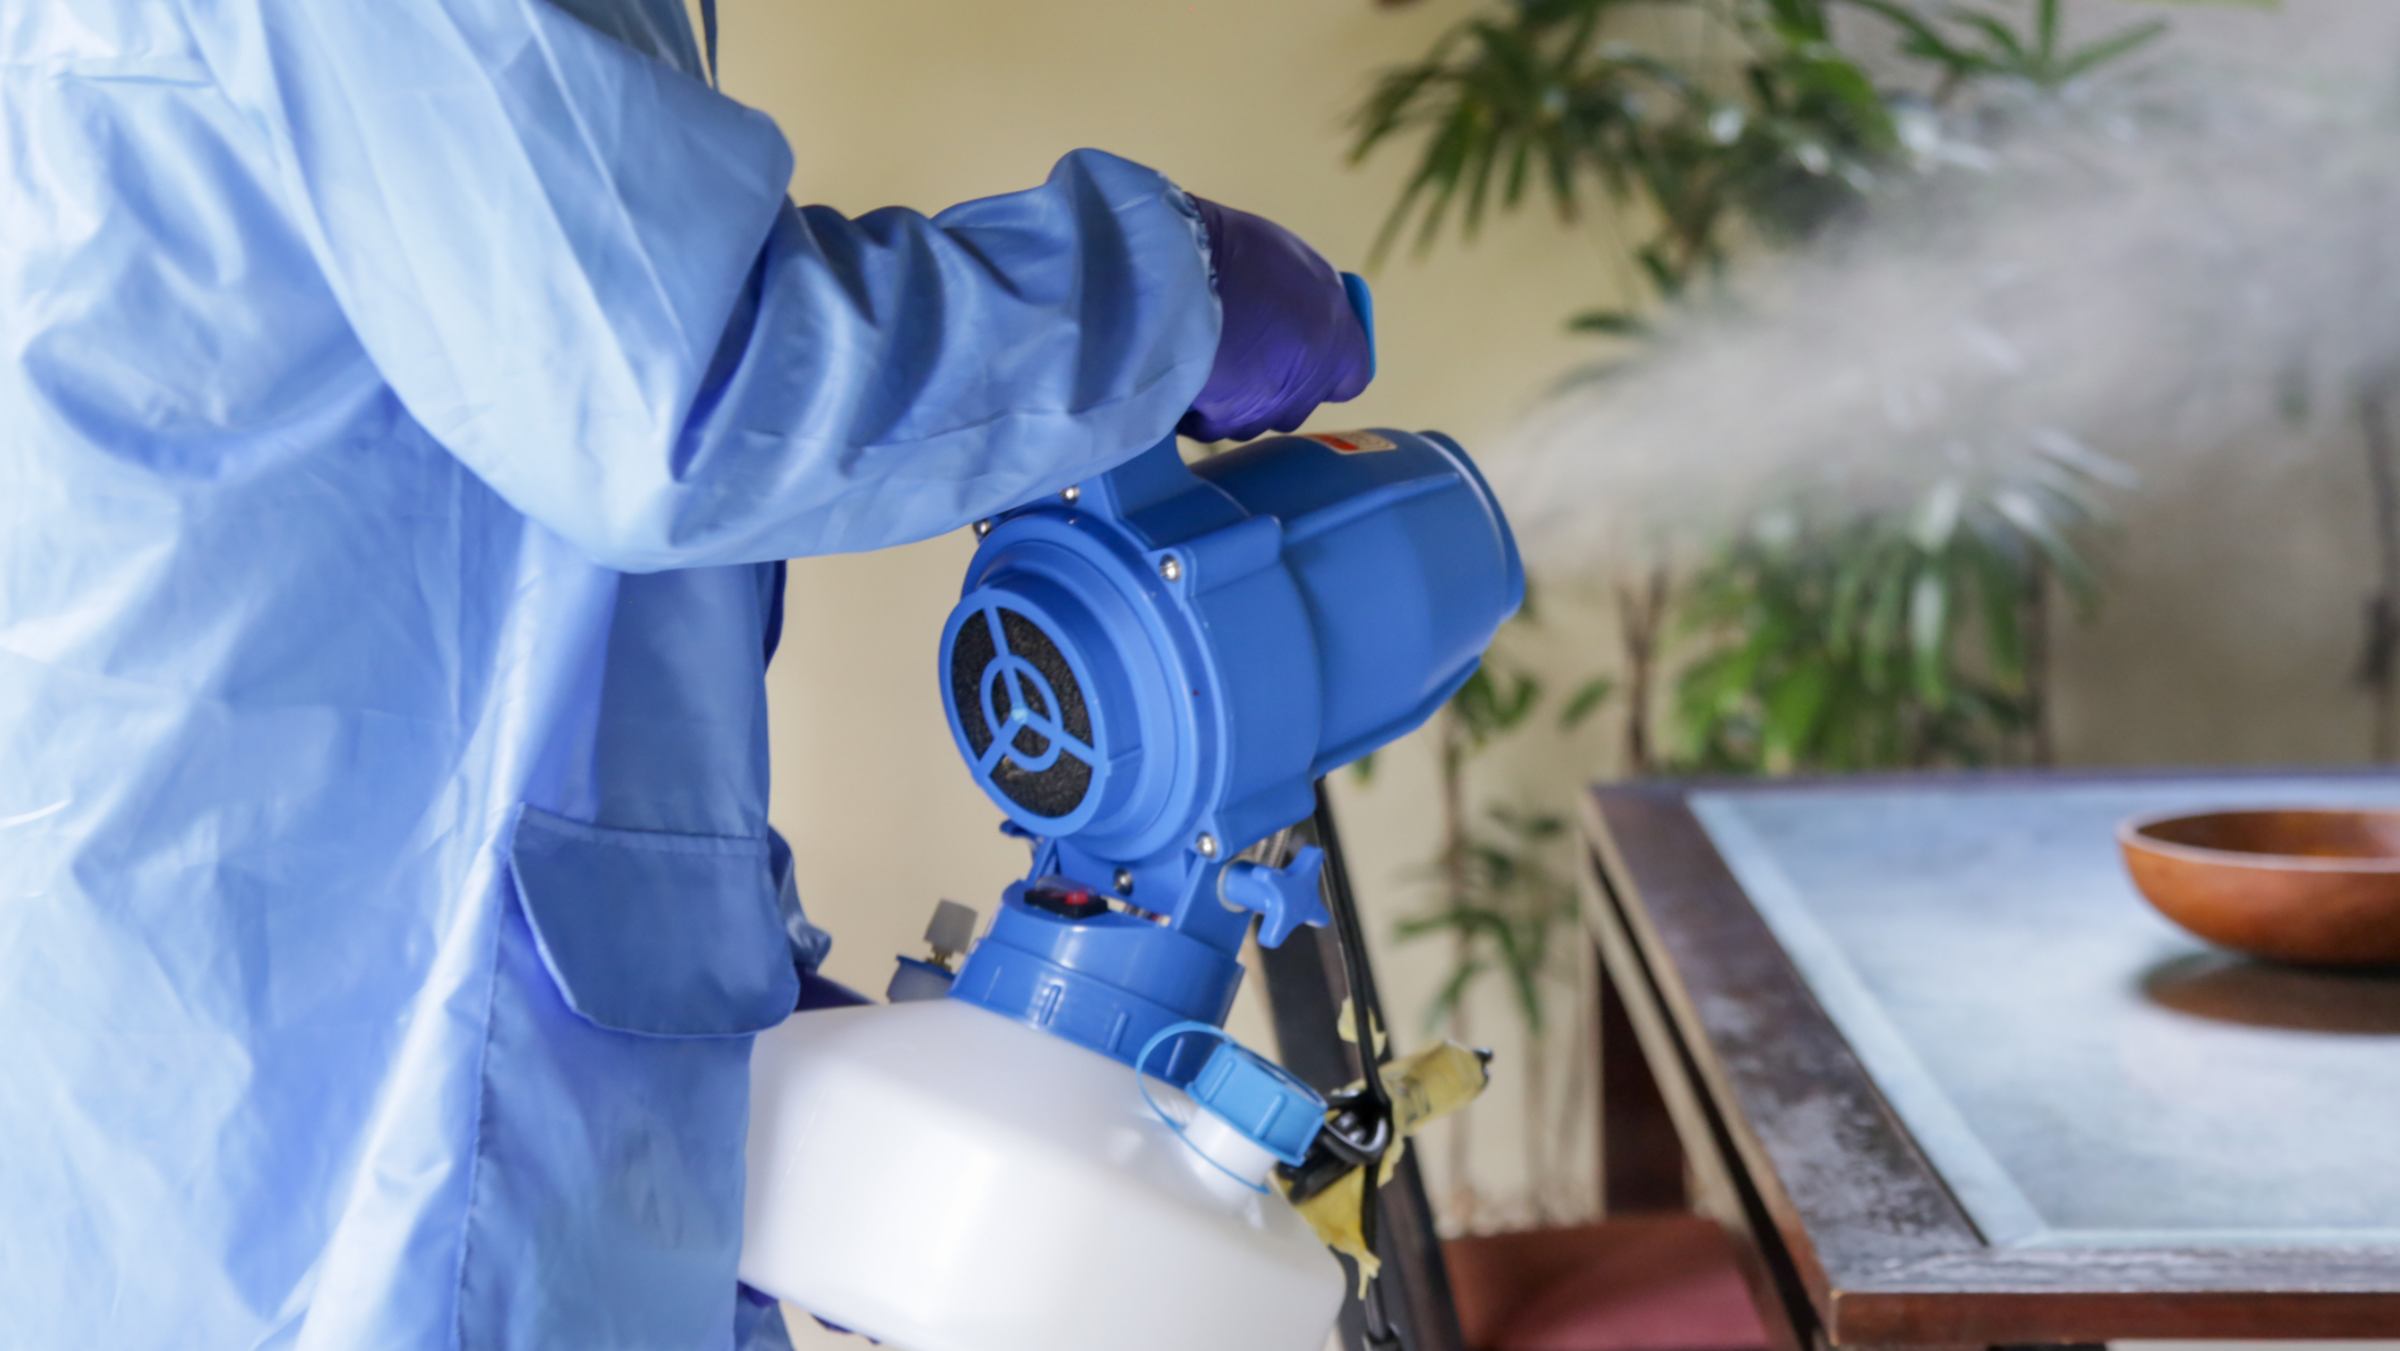 Pest control and removal options - Fumigation